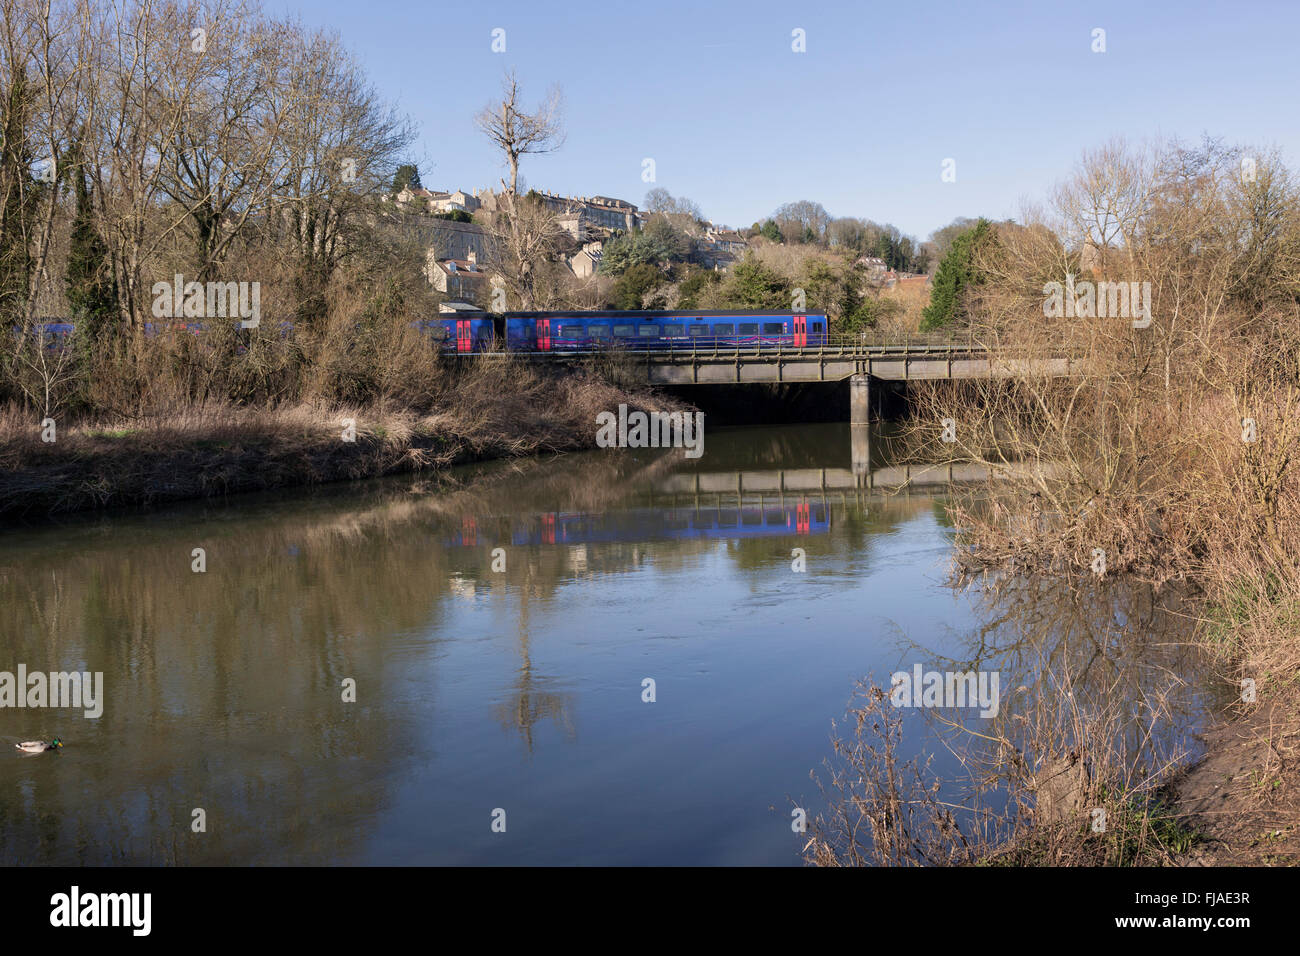 First Great Western train travelling over the river Avon, Bradford on Avon, Wiltshire, England, UK Stock Photo